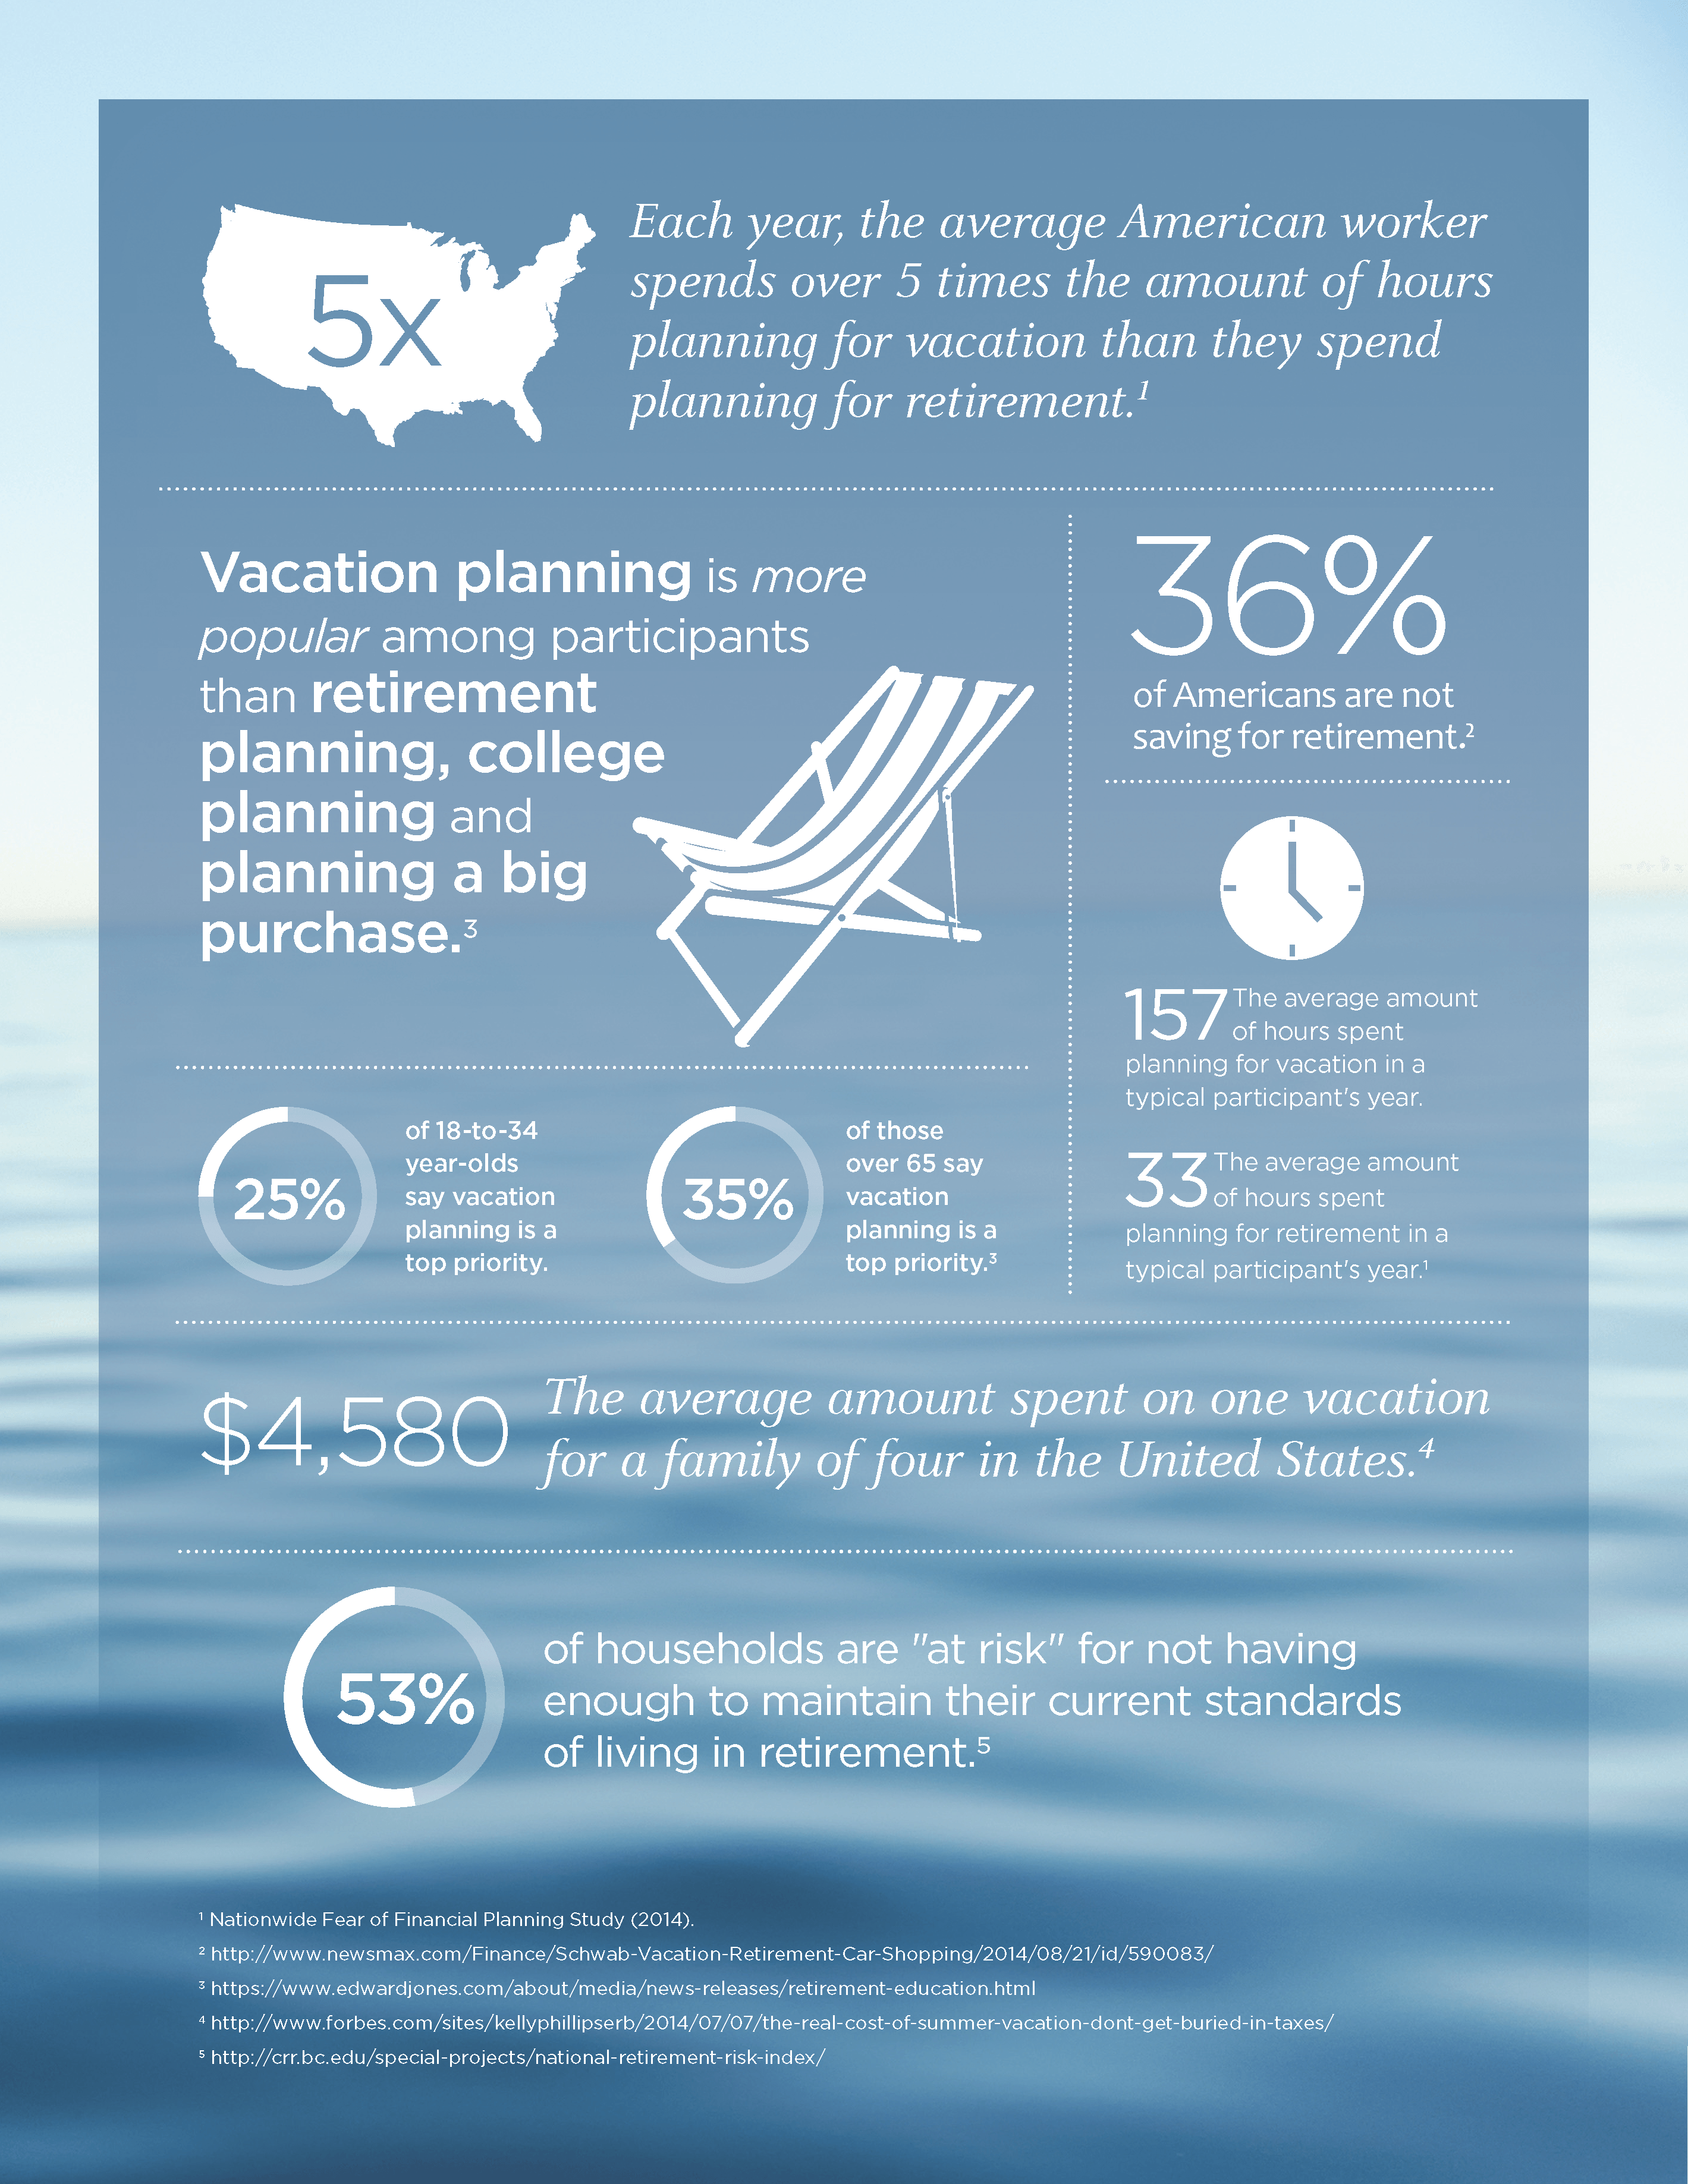 Planning for Retirement | Visual.ly